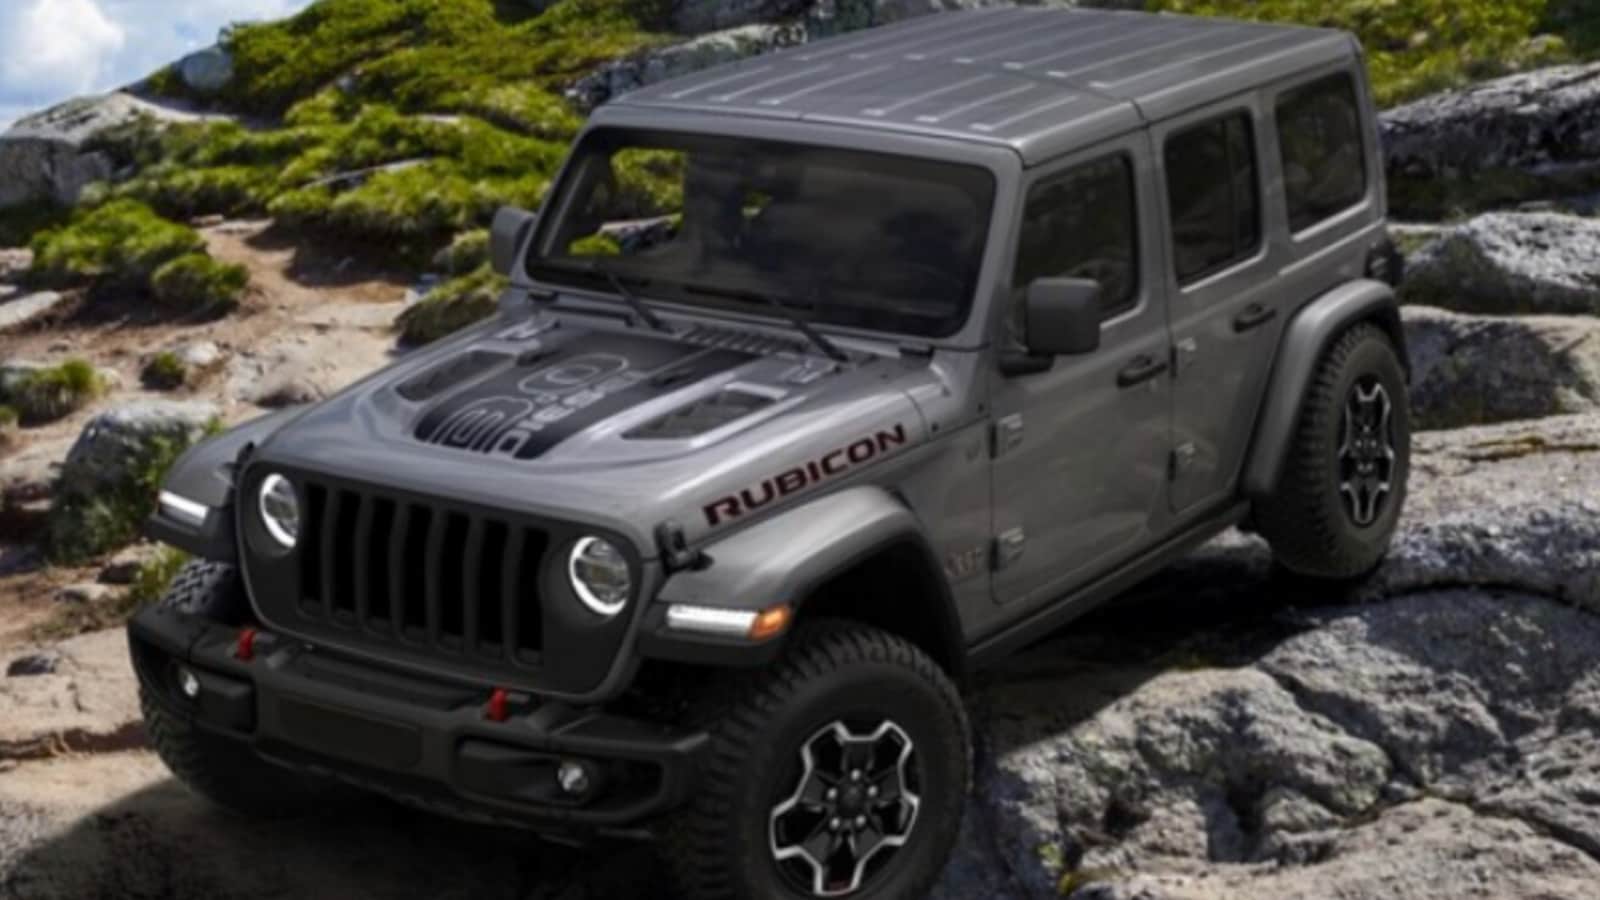 No more diesel power for Jeep Wrangler. Know the reason | HT Auto